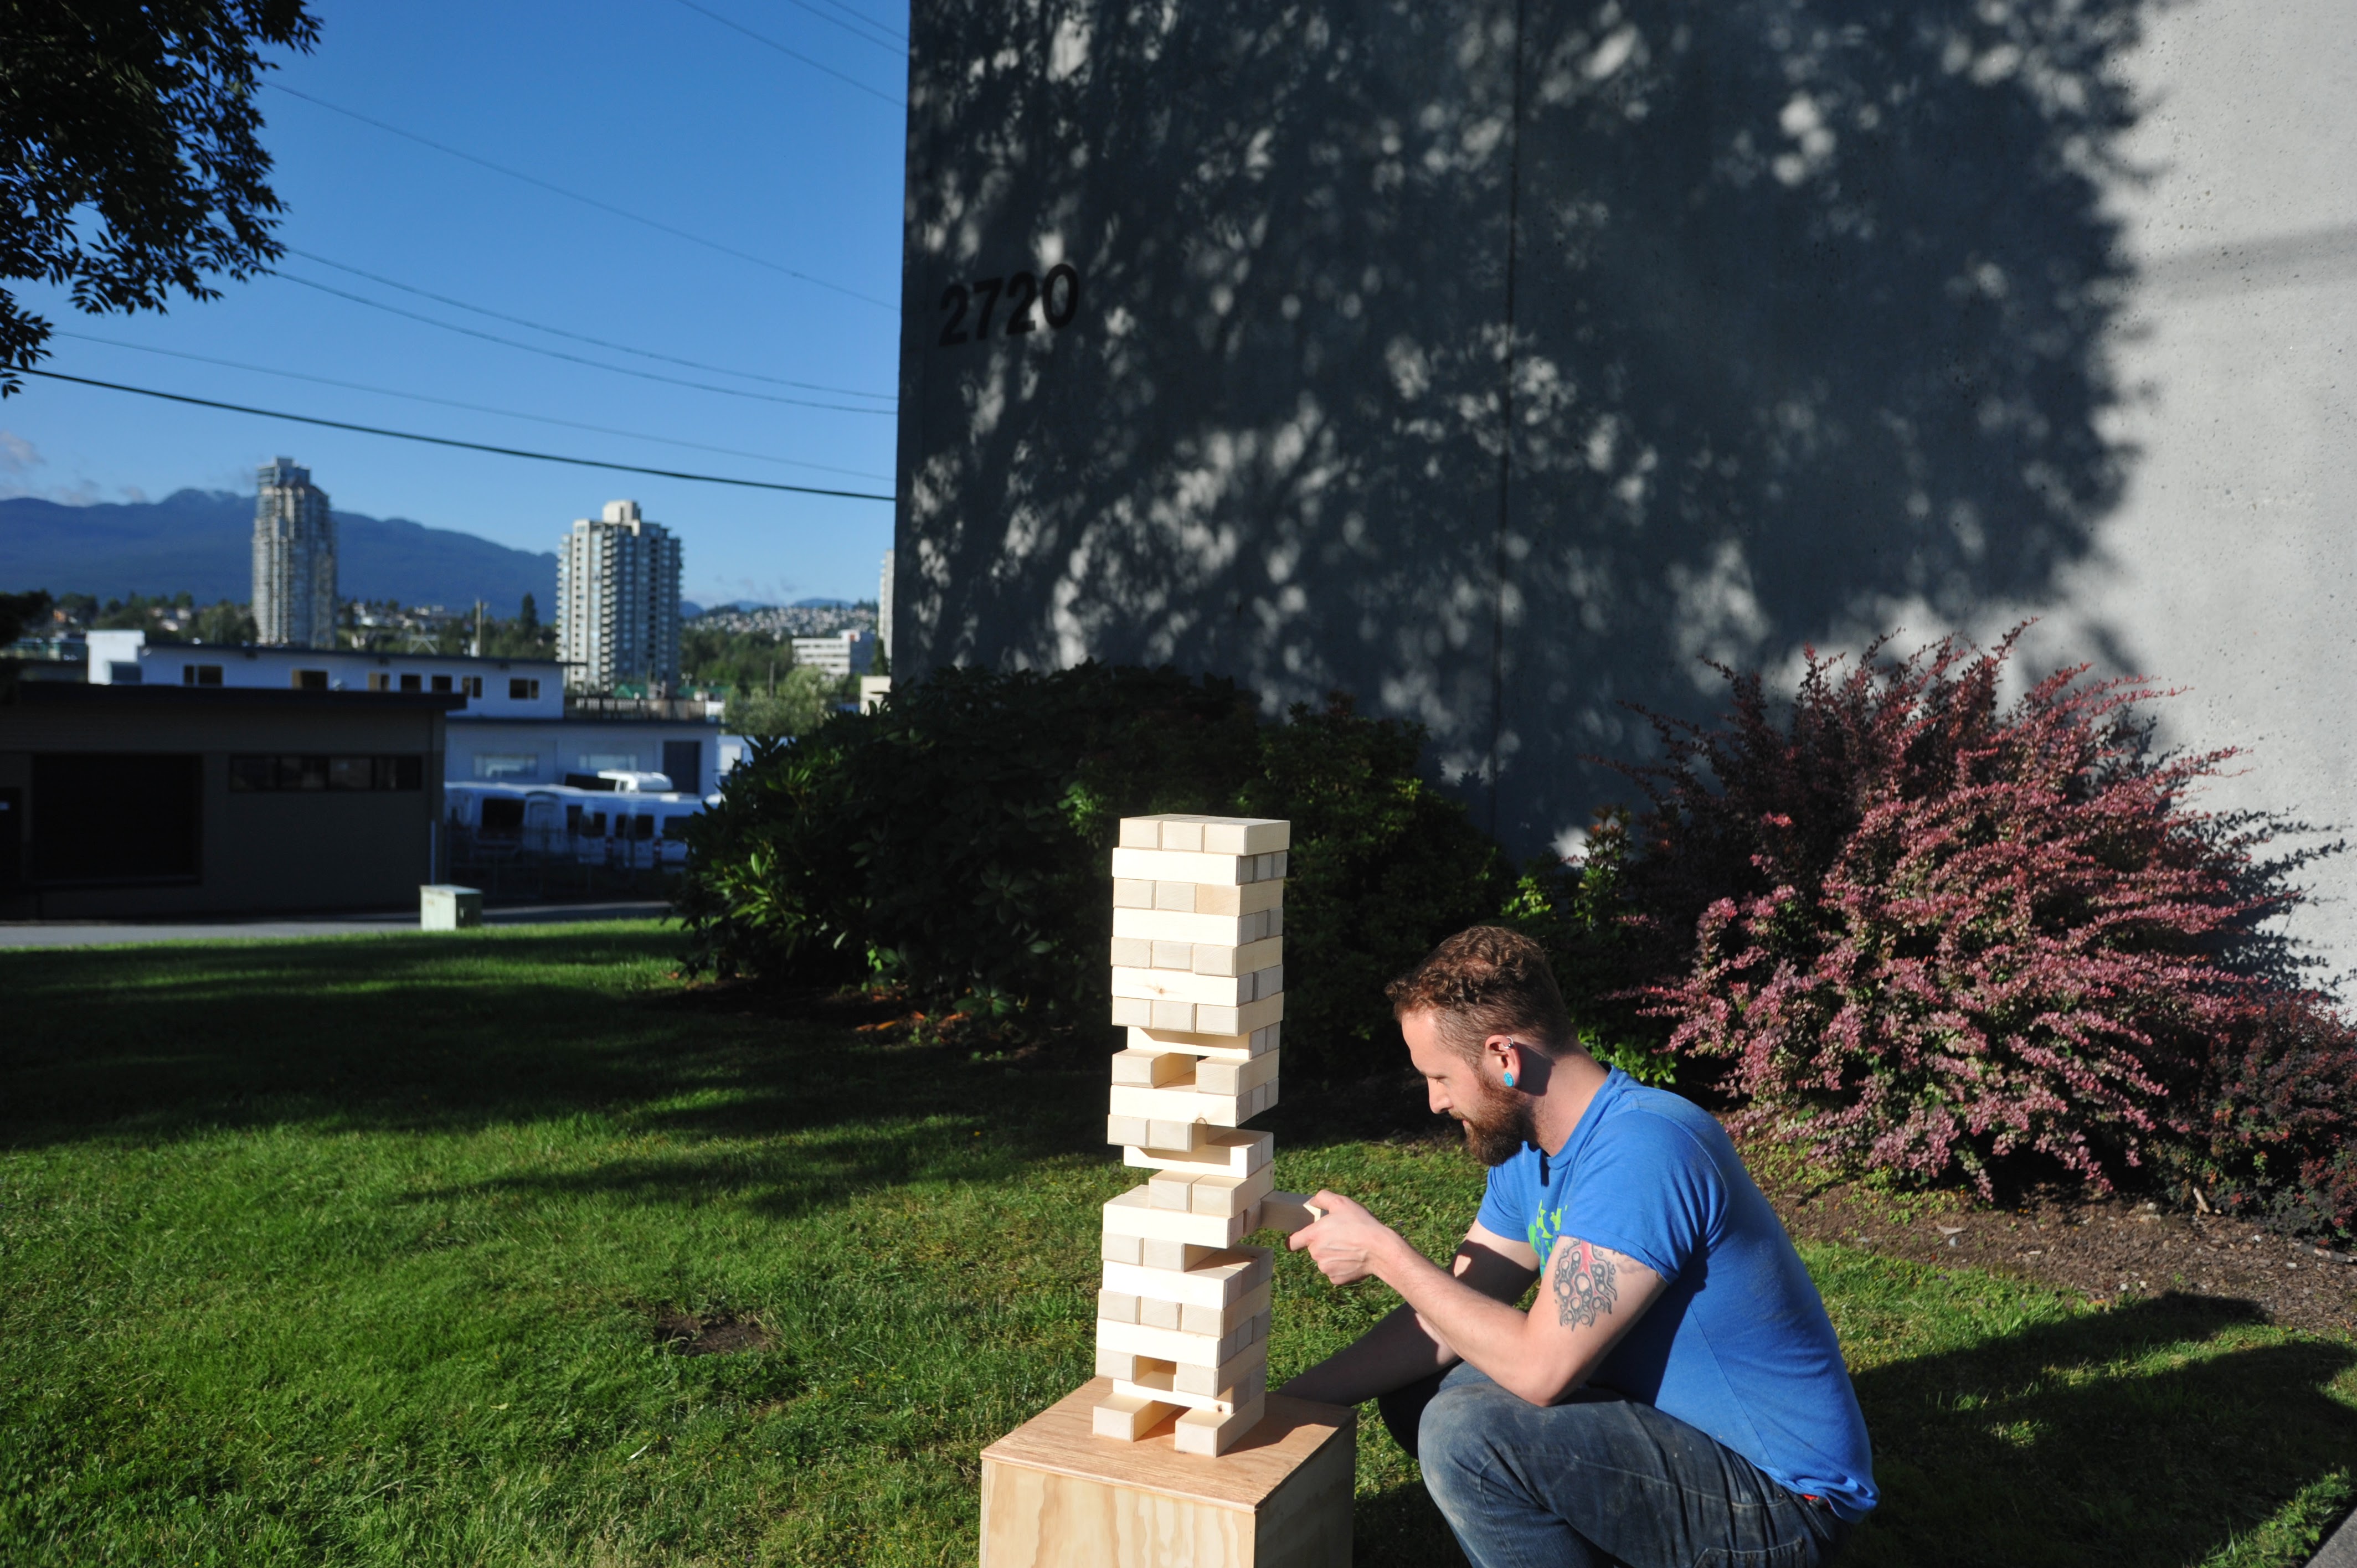 Outdoor Oversized Jenga - You take a block from the middle